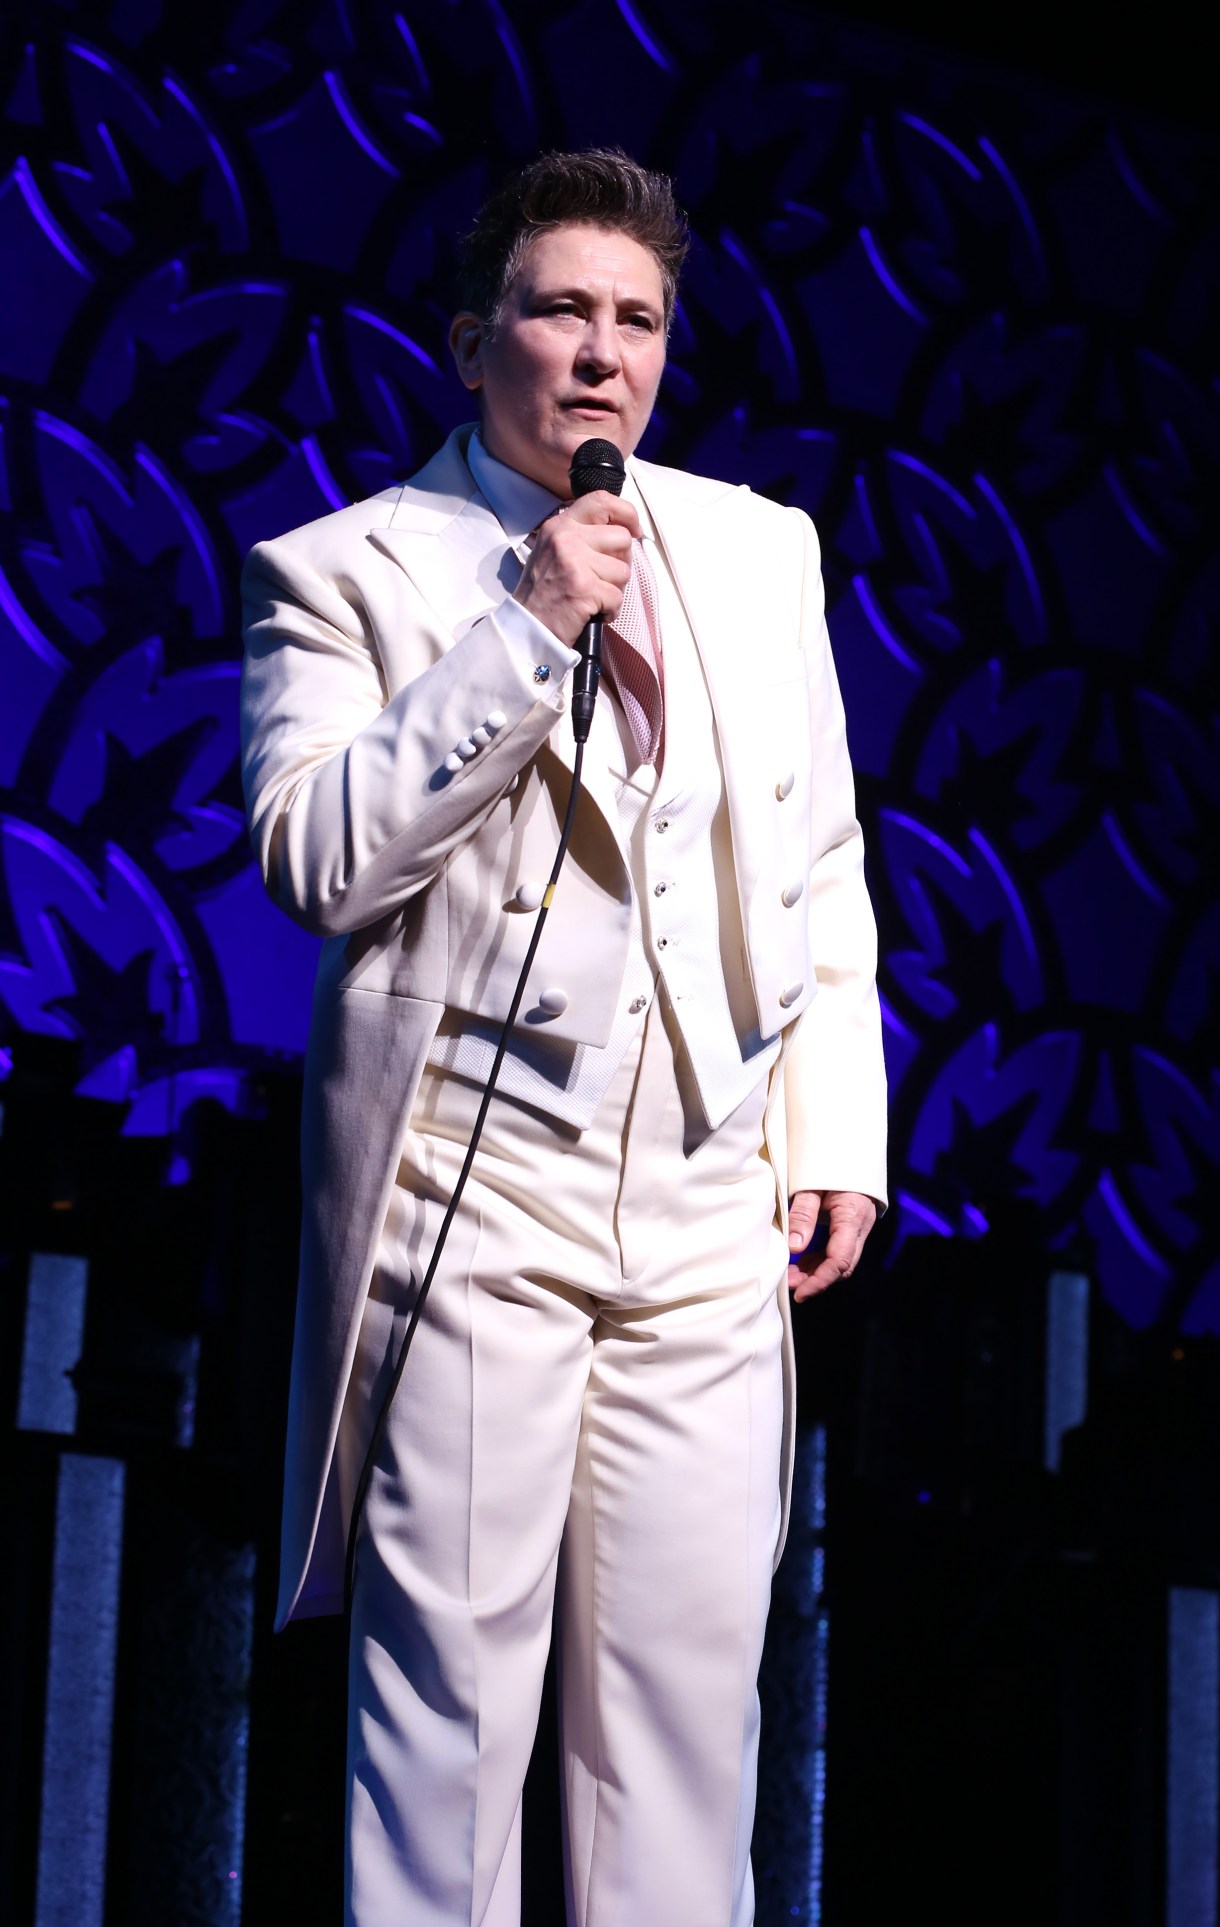 NEW YORK, NY - MARCH 07:  k.d. lang as she performs a special rare "After Midnight" encore performance of her legendary rendition of the Leonard Cohen classic, "Hallelujah" to raise money for the Actor's Fund at the Brooks Atkinson Theater on March 7, 2014 in New York City.  (Photo by Walter McBride/Getty Images)